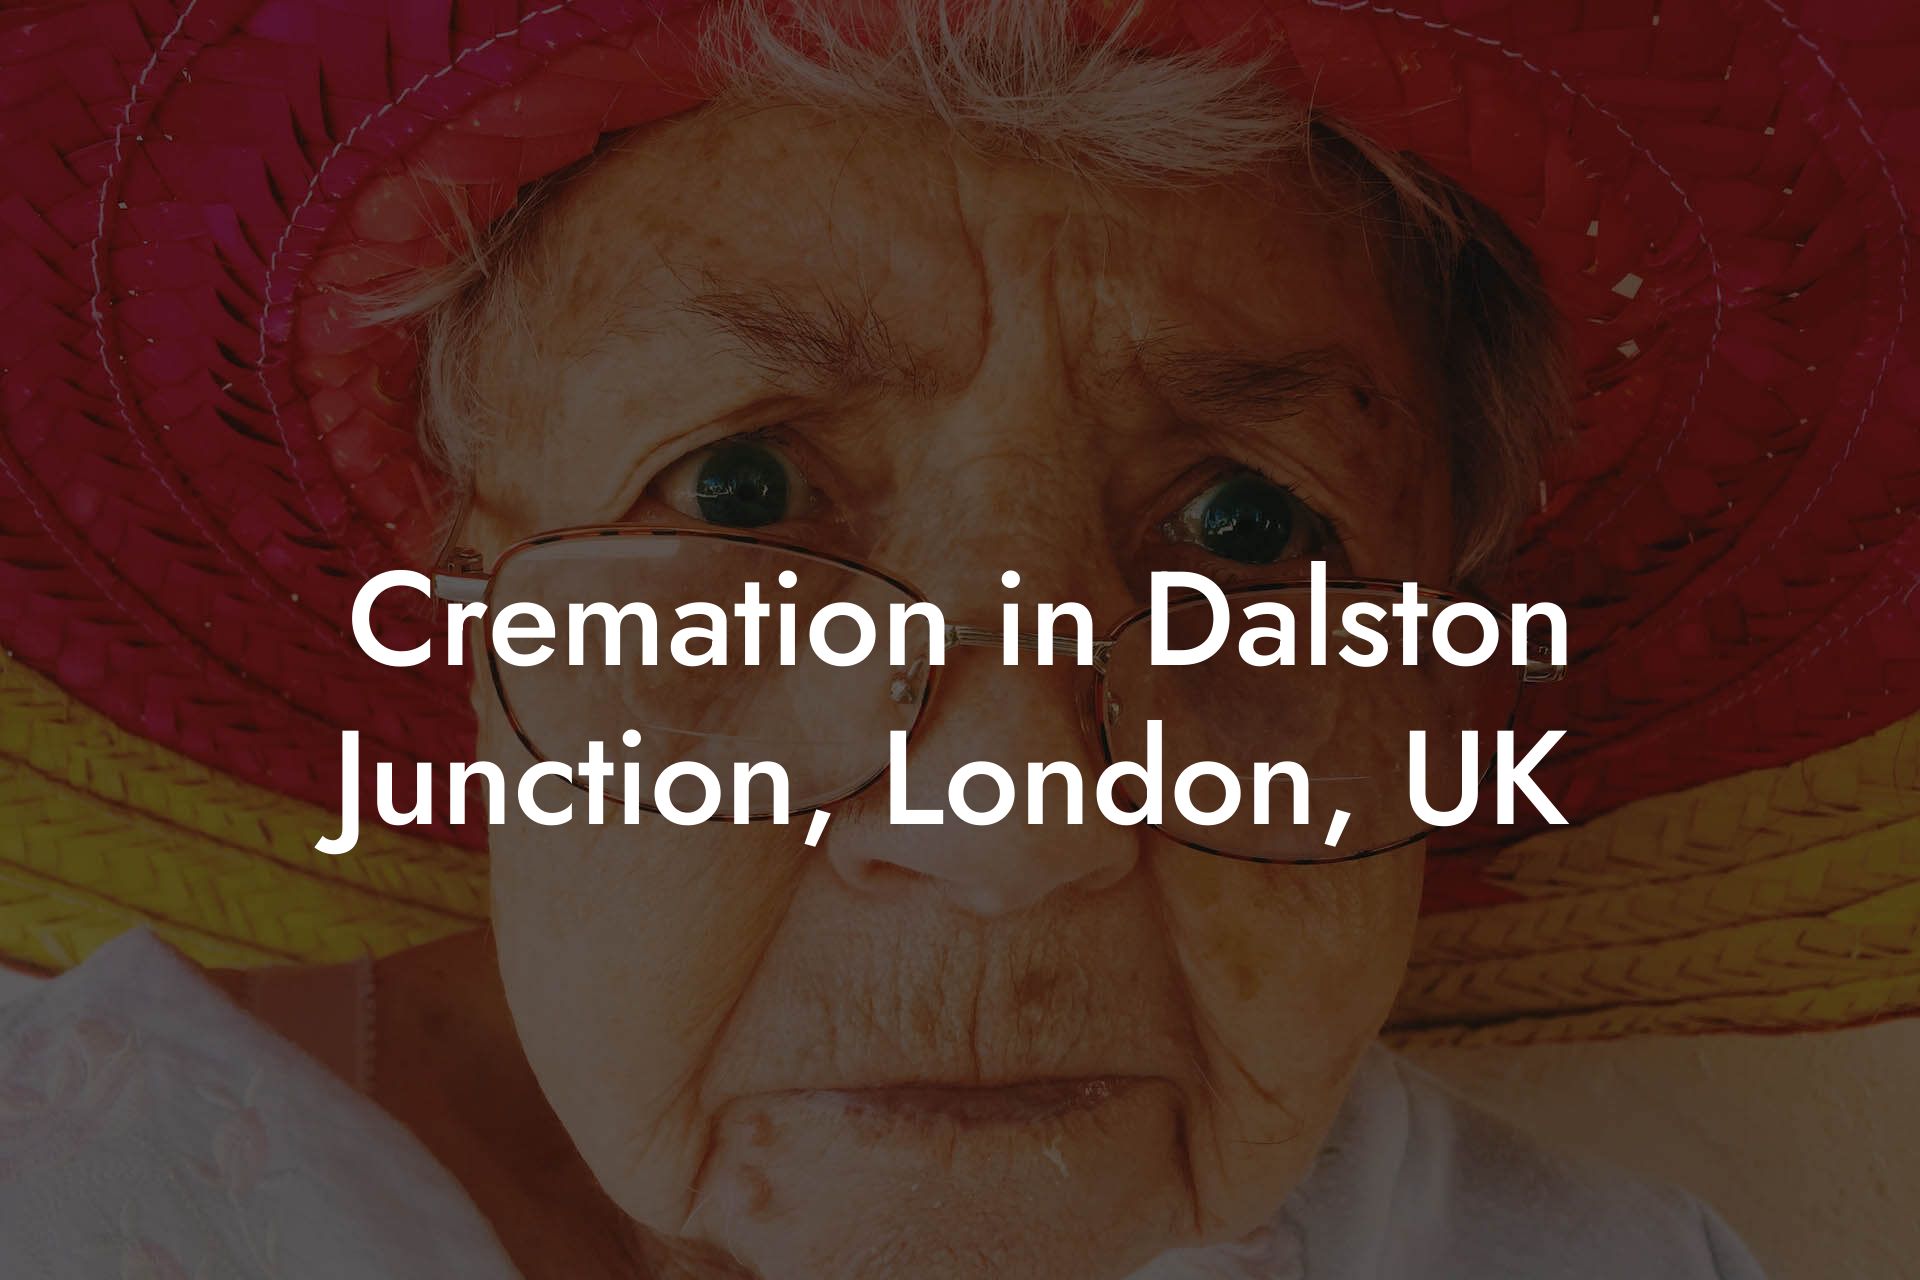 Cremation in Dalston Junction, London, UK